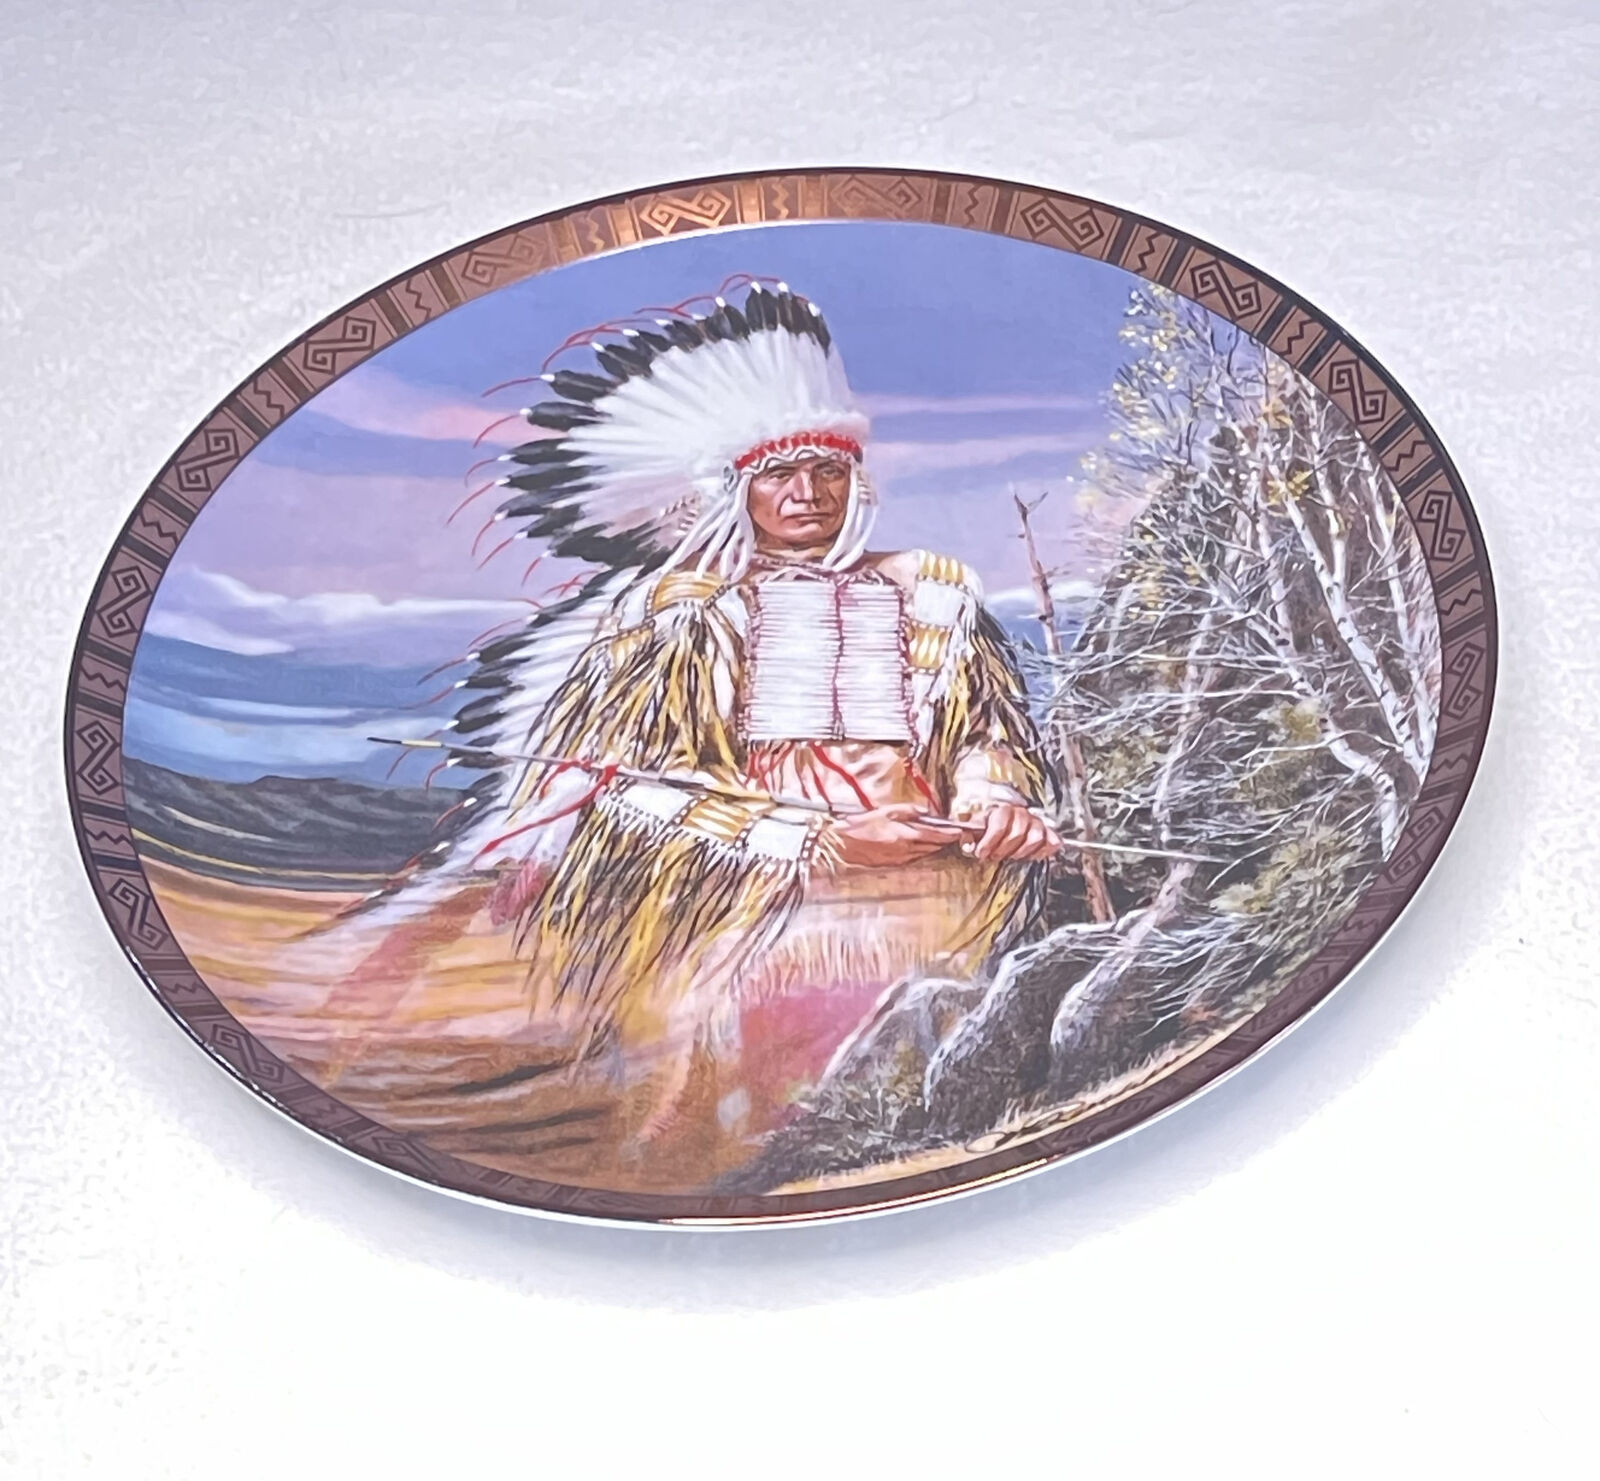 The Franklin Mint American Indian Heritage Foundation Museum Porcelain Red Cloud